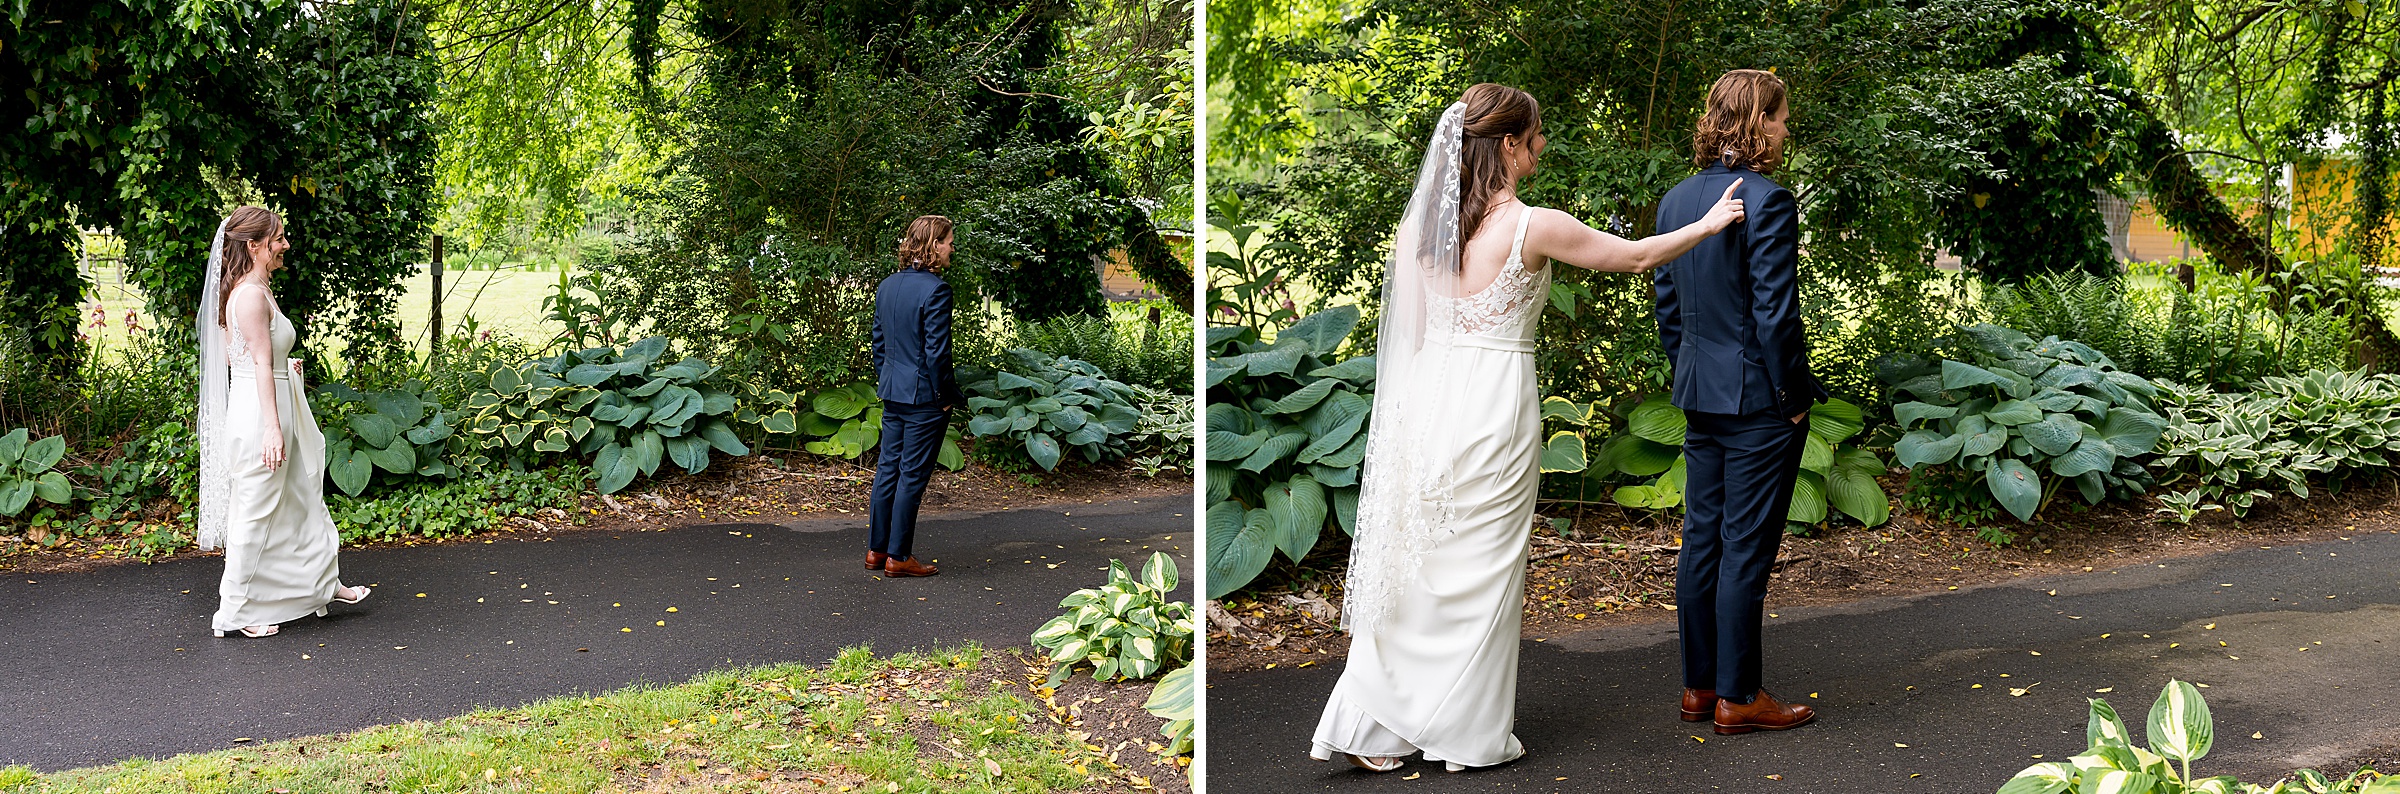 A bride in a white dress and veil walks towards a groom in a navy suit; she taps him on the shoulder in a garden setting.